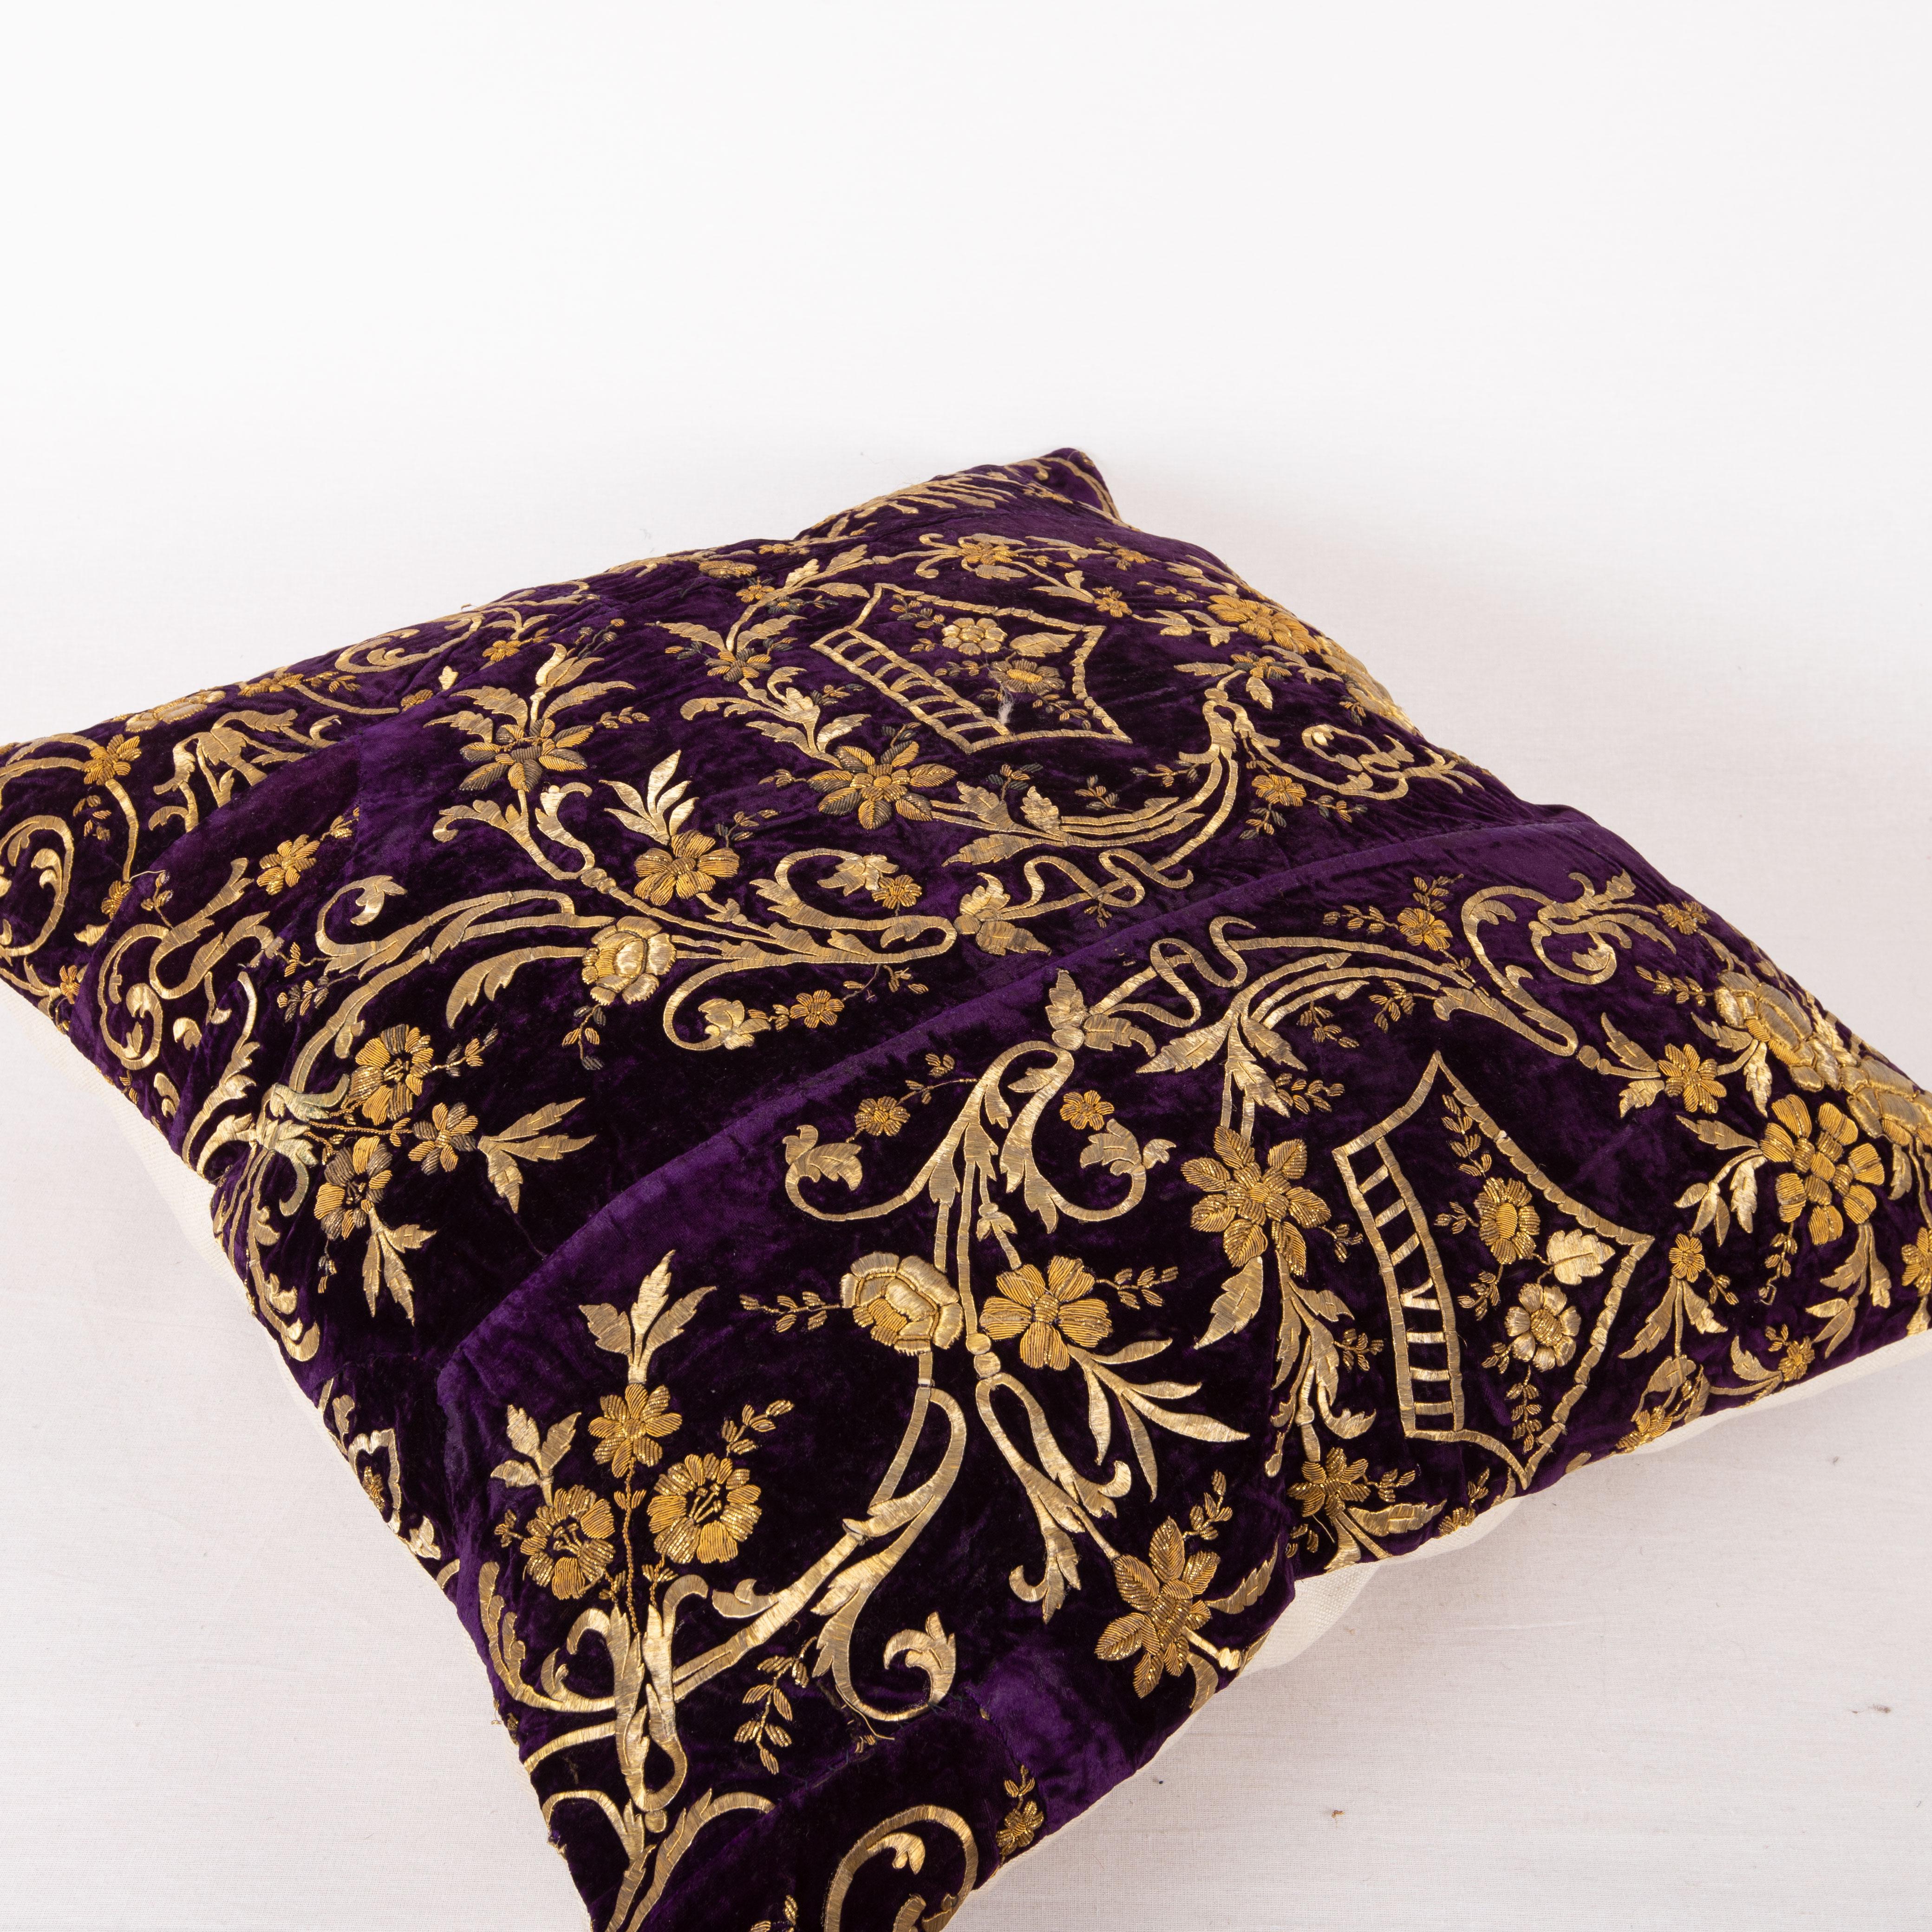 19th Century Antique Pillow Cover Made from a Silk Velvet Sarma Embroidery Fragment., L 19th 